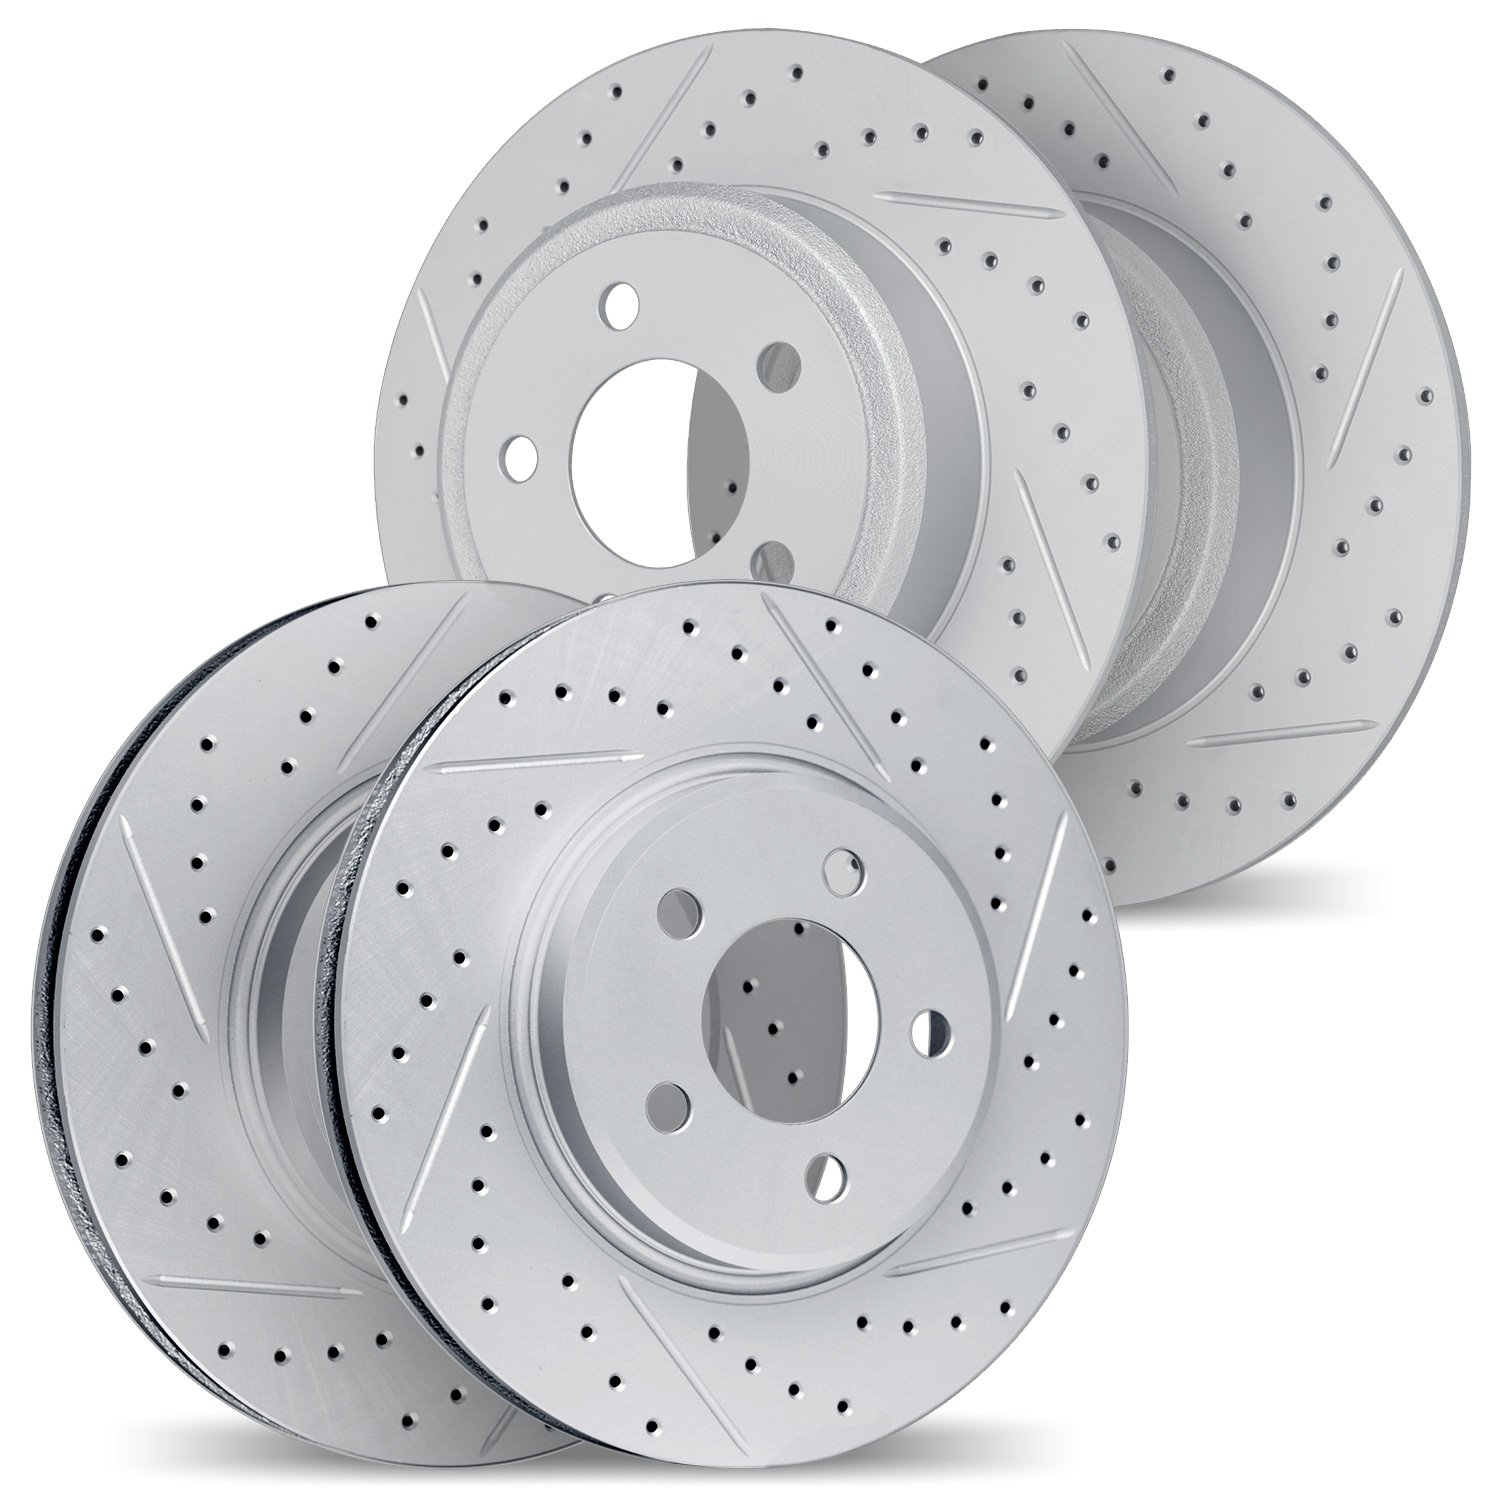 2004-73018 Geoperformance Drilled/Slotted Brake Rotors, 1998-2001 Audi/Volkswagen, Position: Front and Rear